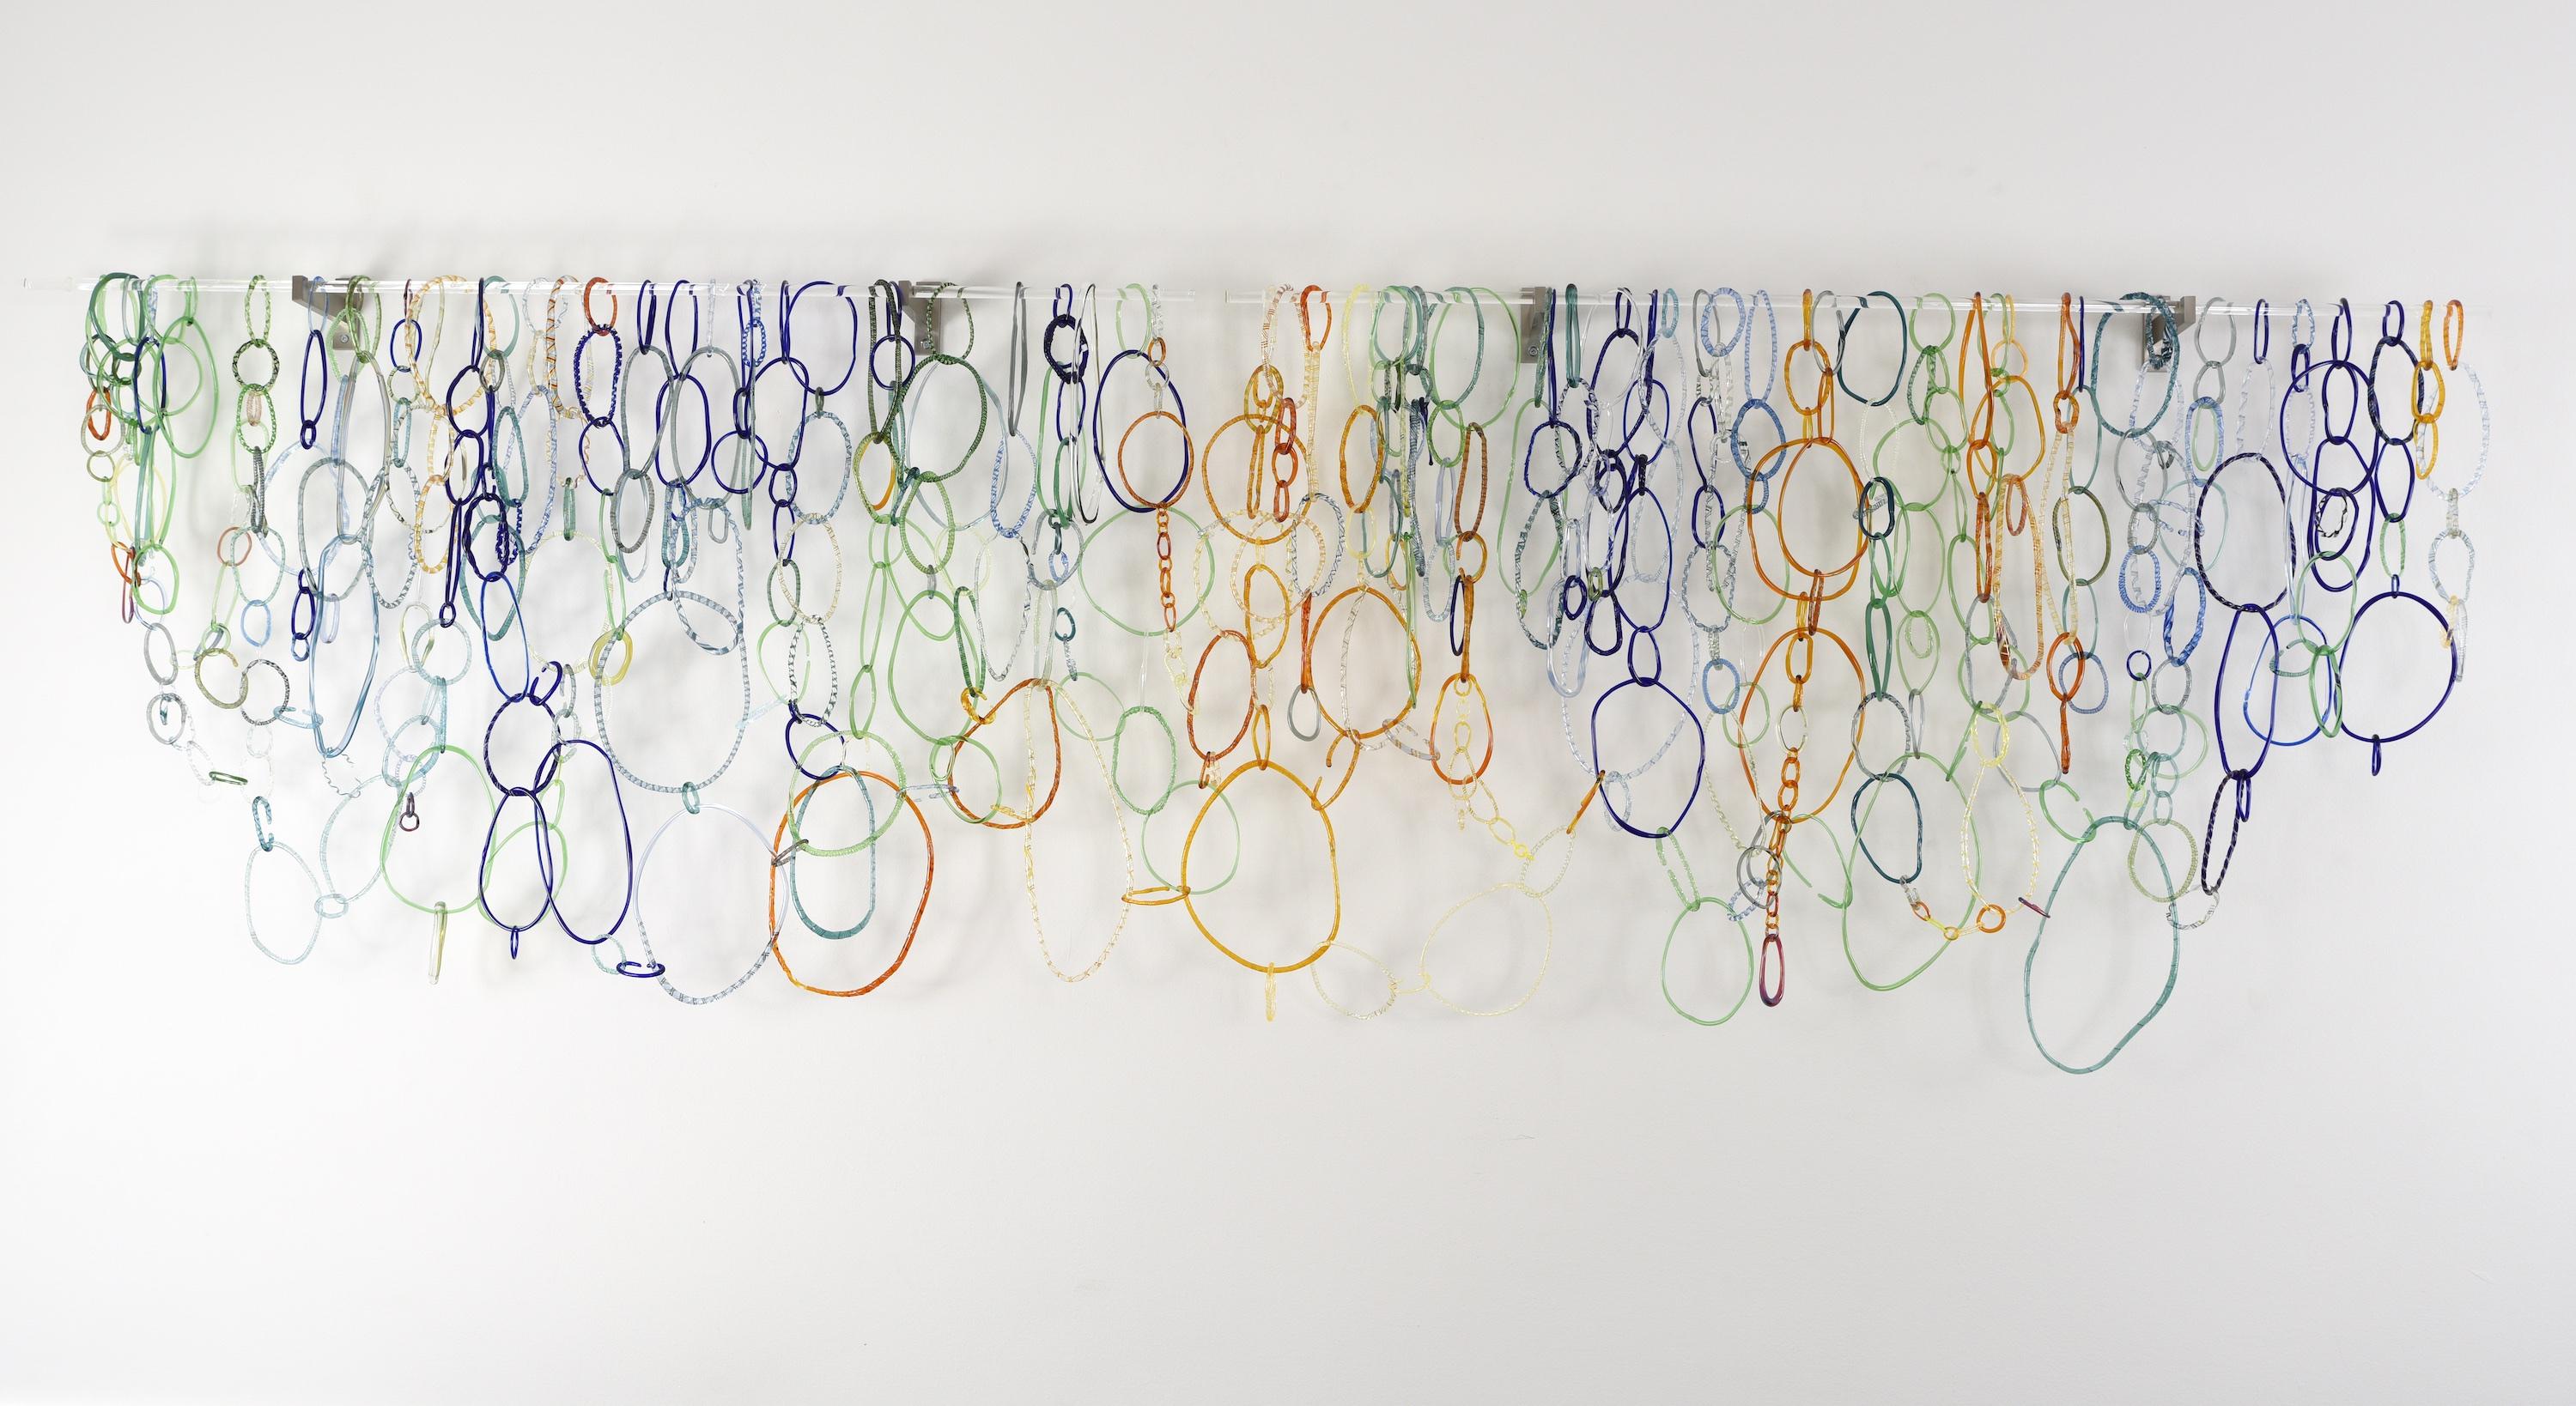 Rockwood Brook I, Large Hanging Wall Sculpture, Blue Orange Green Glass Loops - Gray Abstract Sculpture by David Licata